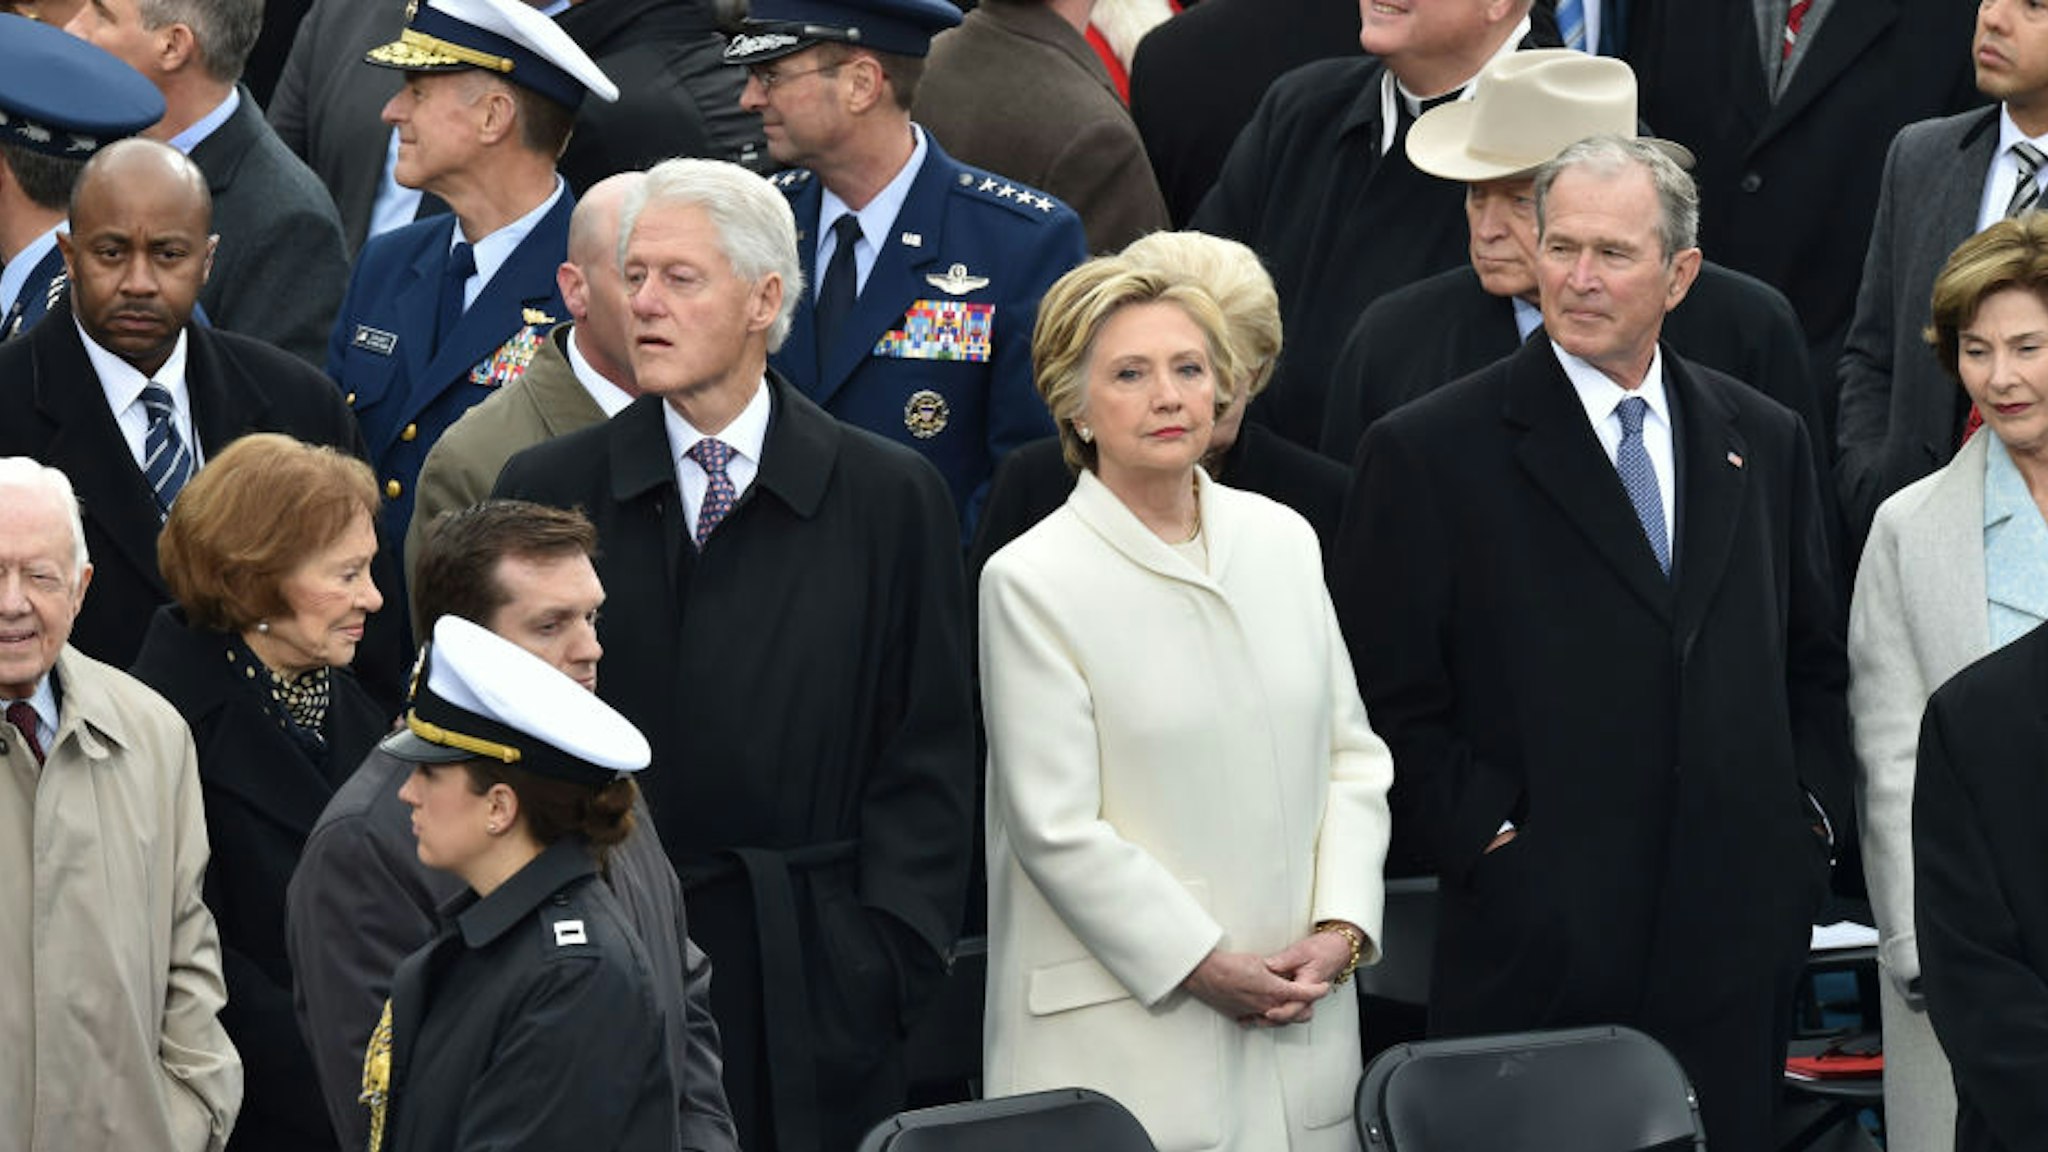 Former Us President Bill Clinton(L), former US President Jimmy Carter(L) former US President George W. Bush(2ndR) and Hillary Clinton(C) arrive on the platform of the US Capitol in Washington, DC, on January 20, 2017,